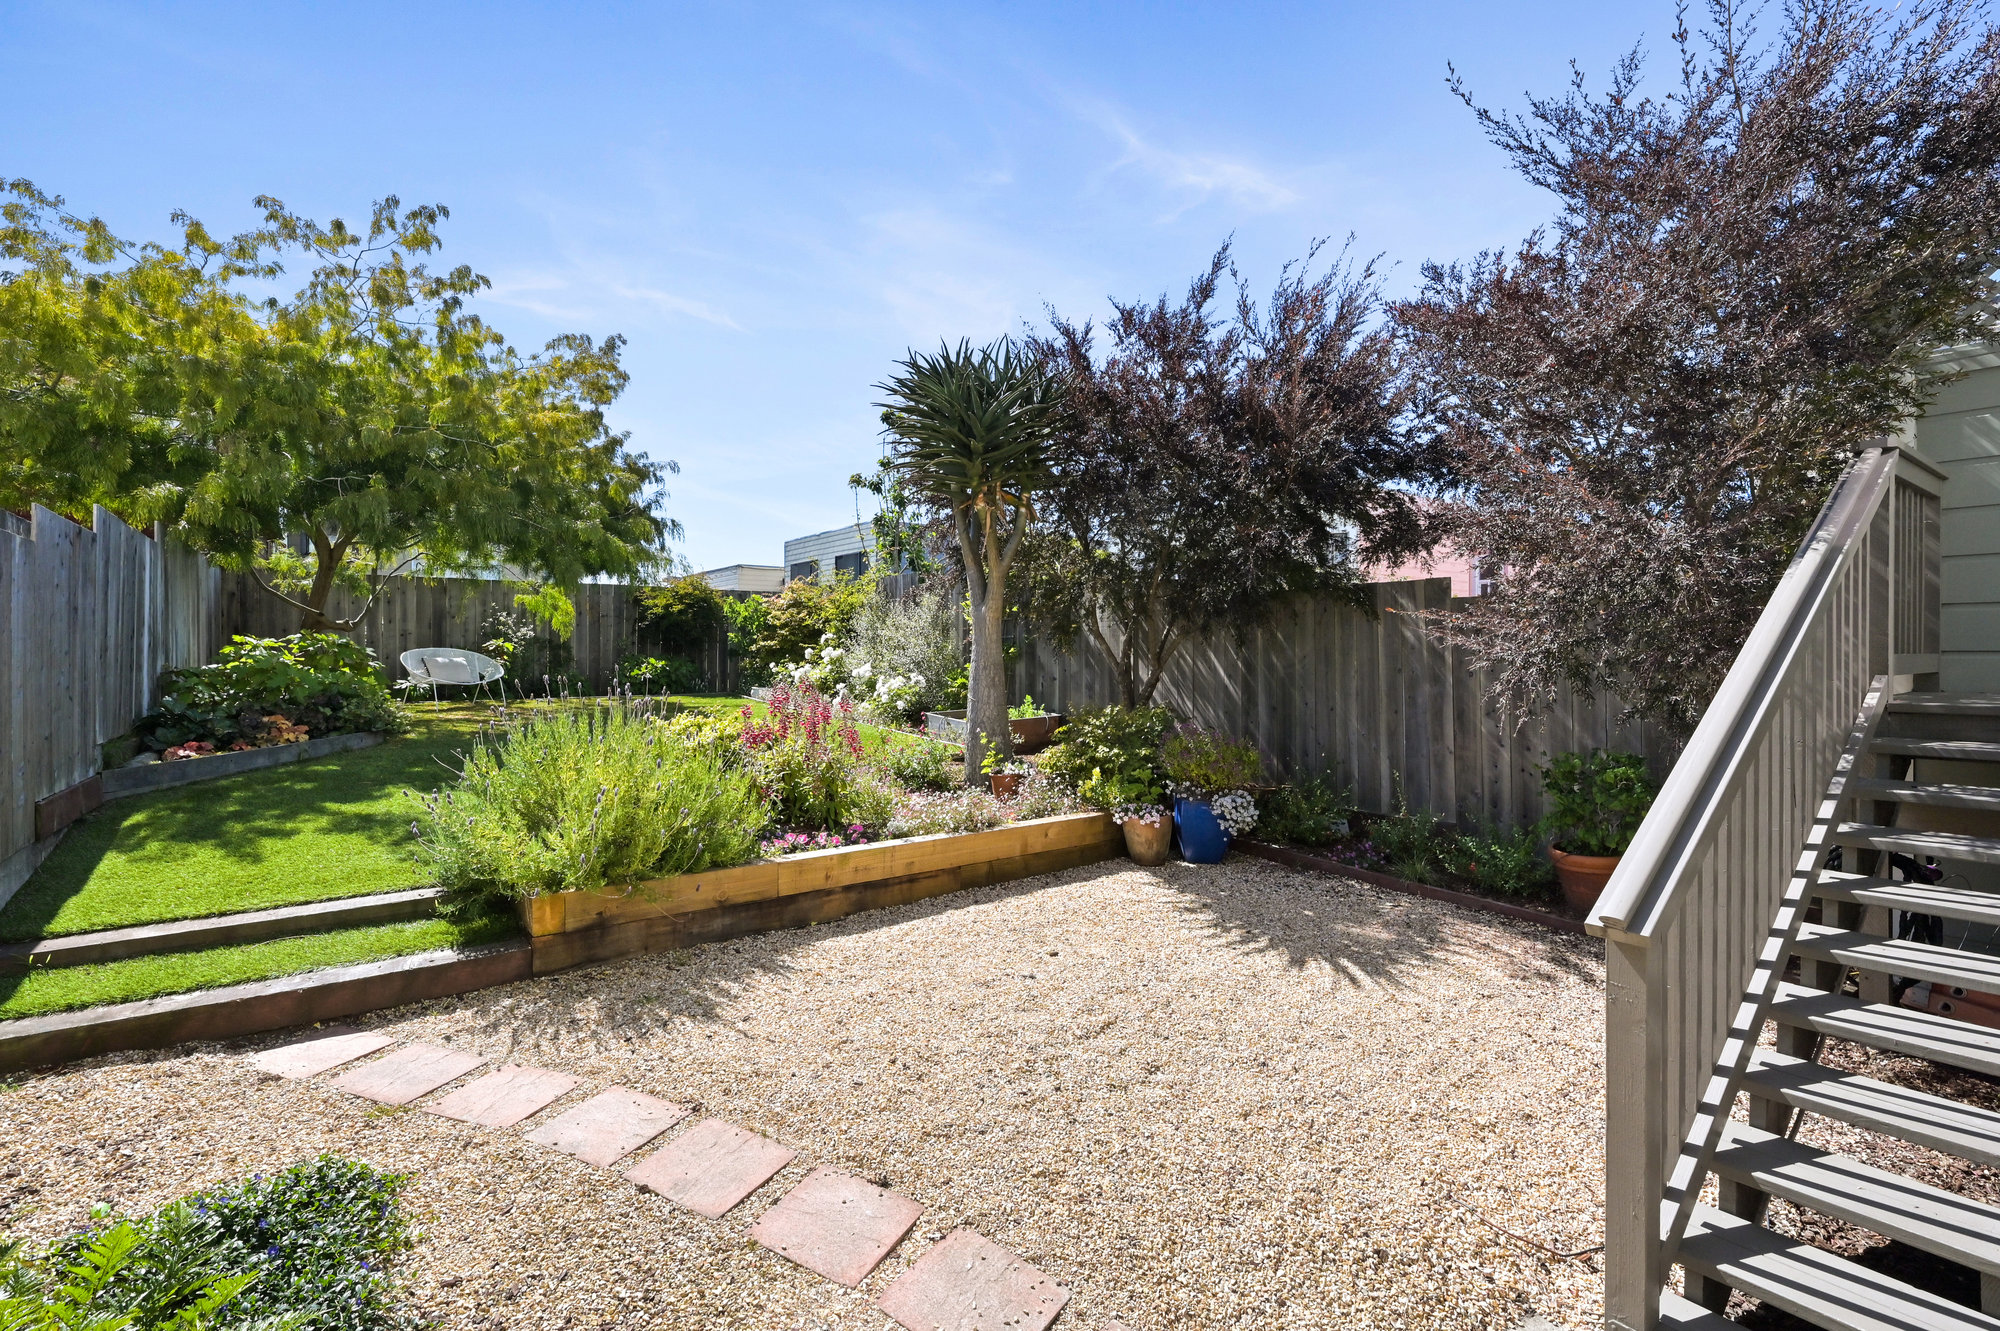 Property Photo: View of the large rear yard at 719 18th Avenue, showing various plants and trees